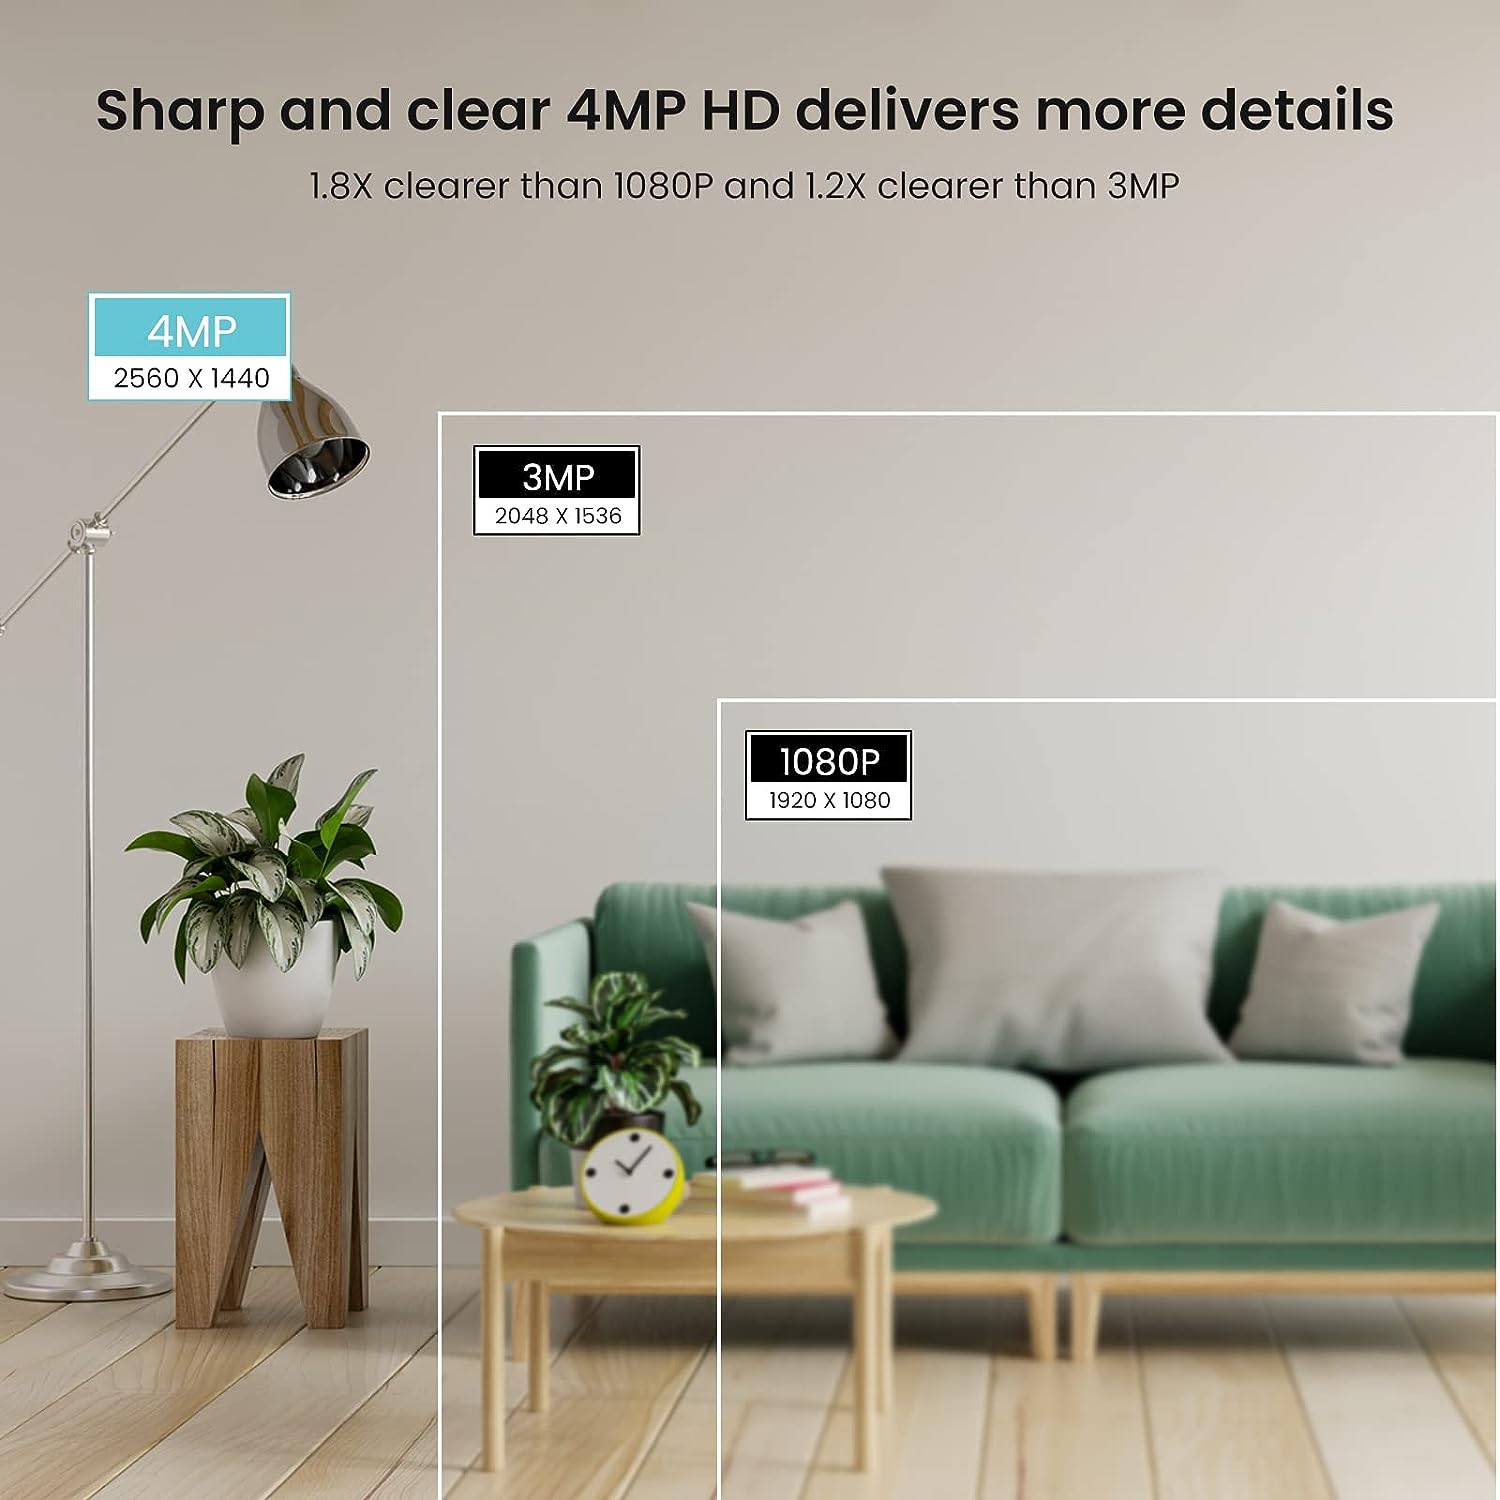 Tenda (CP7) Cameras for Home Security, 2.5K Indoor Camera WiFi Camera, 360° Pan Tilt WiFi Camera with Phone APP, 2-Way Audio, Night Vision, Smart Tracking, Human Detection, Cloud Storage